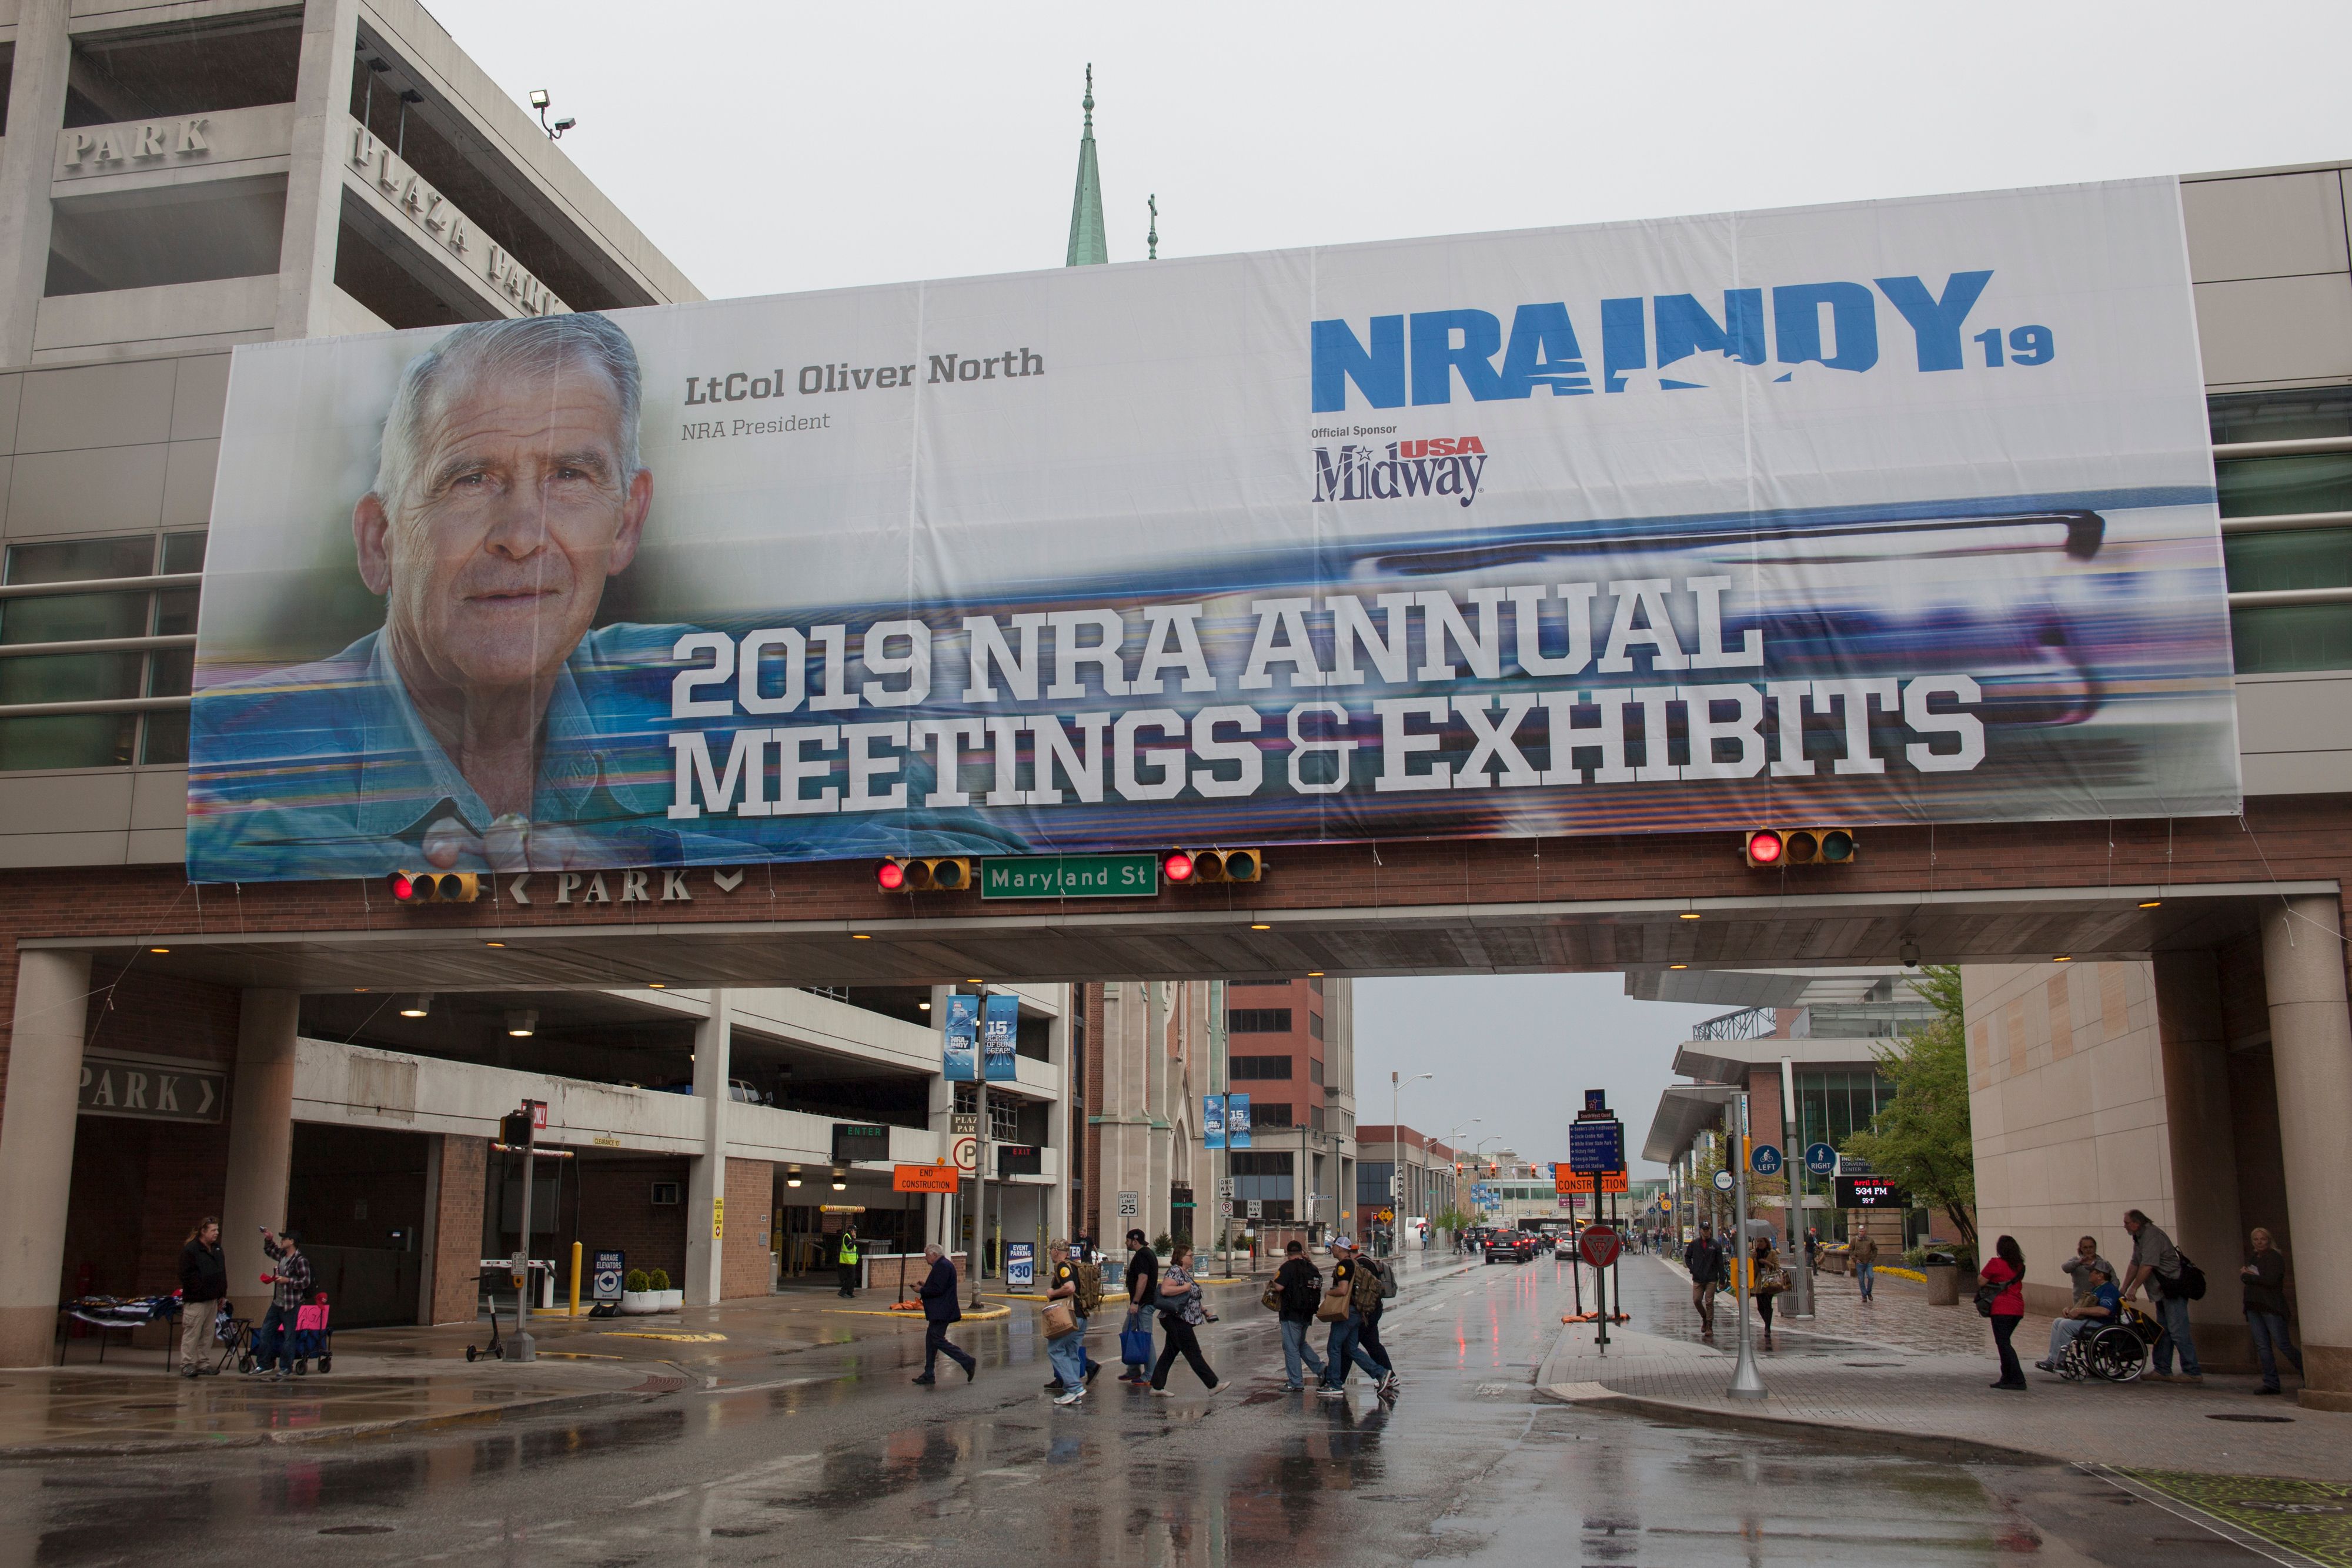 A sign featuring the former President of the National Rifle Association Lt Col. Oliver L. North hangs outside of the Indiana Convention Center in downtown Indianapolis, Indiana, April 27,2019 during the 2019 National Rifle Association Annual Meetings. - After bitter infighting the NRA President announced Saturday, April 27,2019 that he would step down from his position. (Photo by SETH HERALD/AFP/Getty Images)